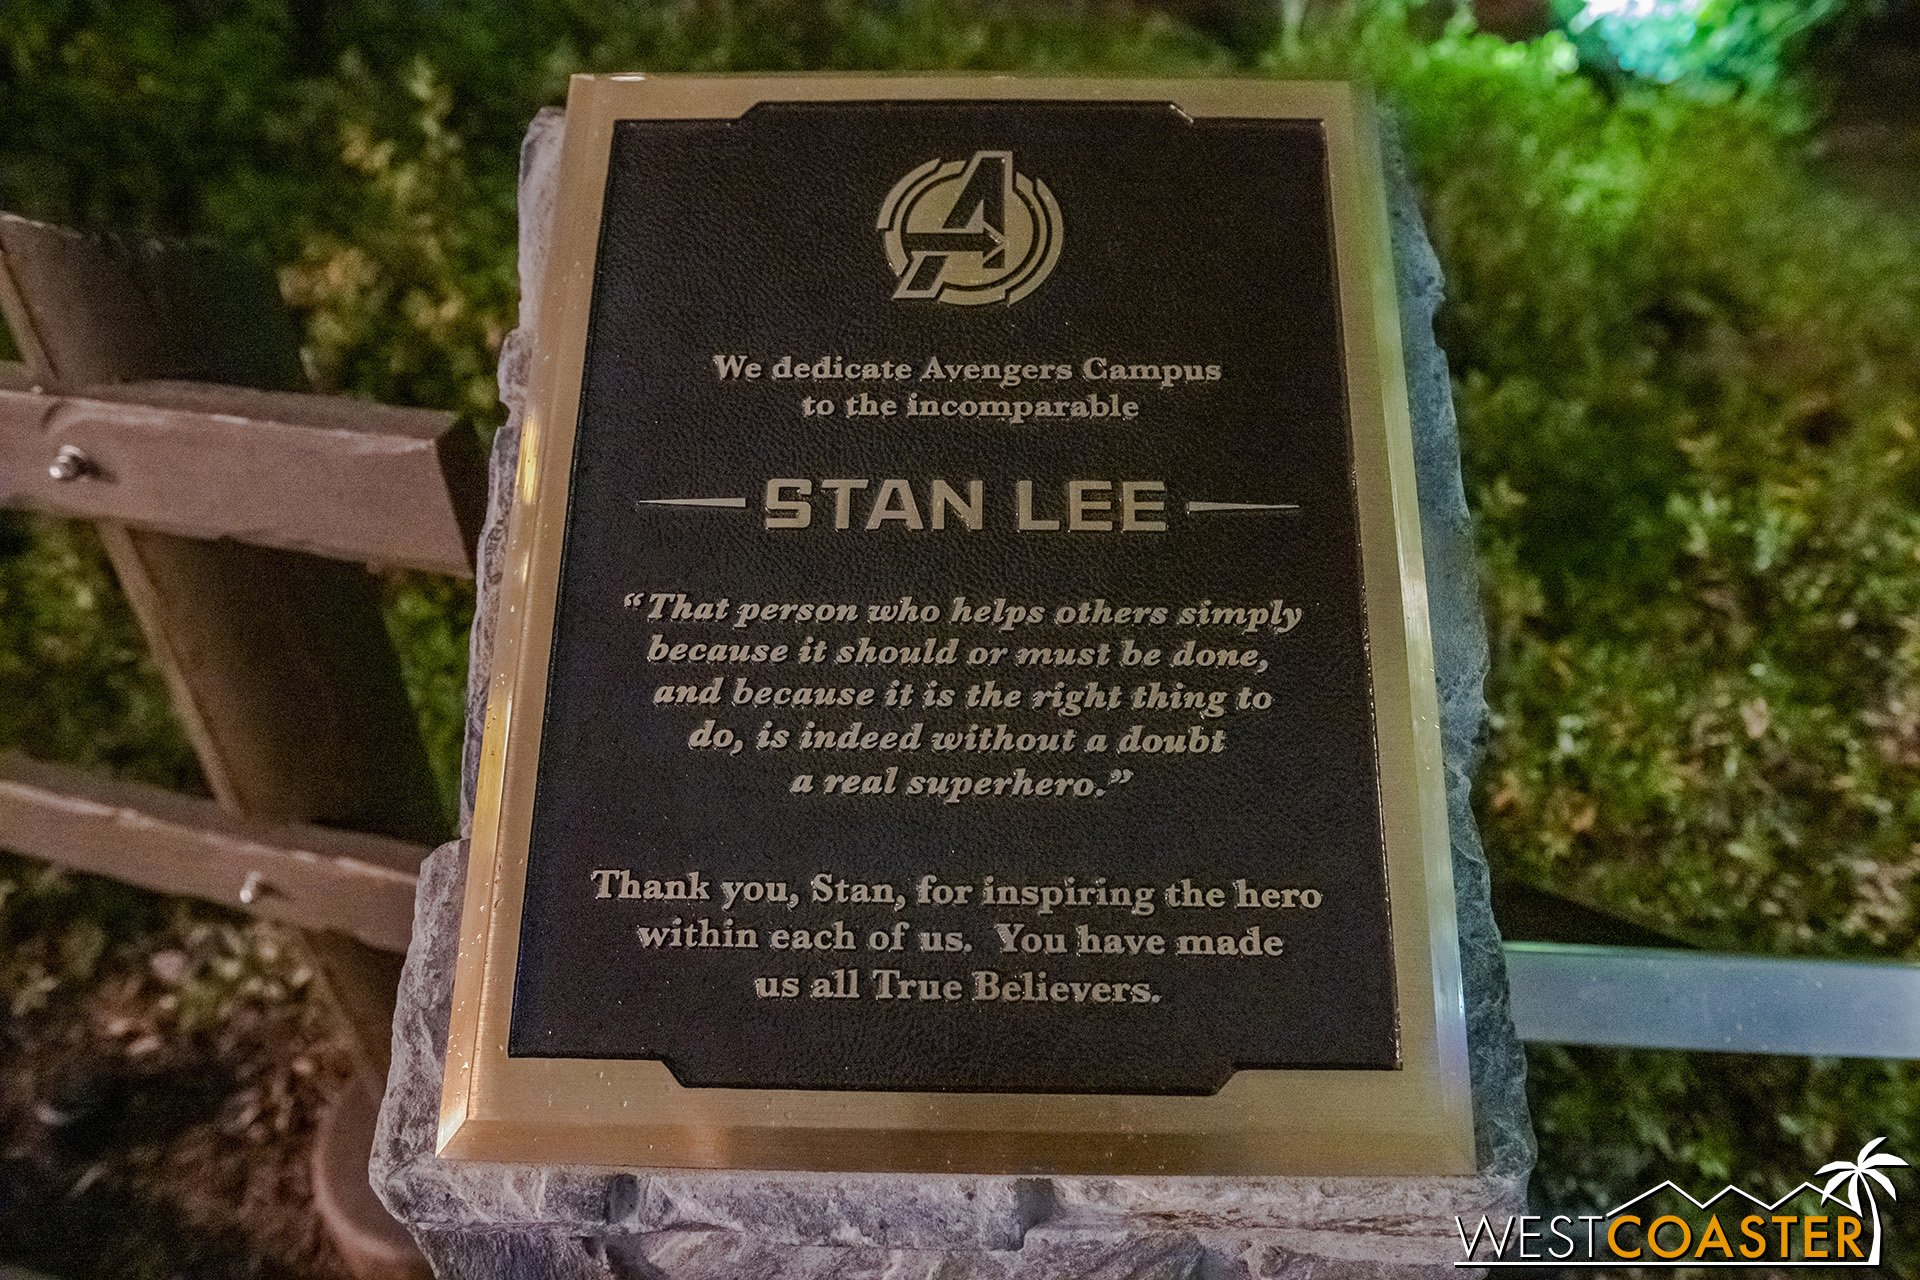  Here’s a close-up of the plaque dedicated to the great Stan Lee. 